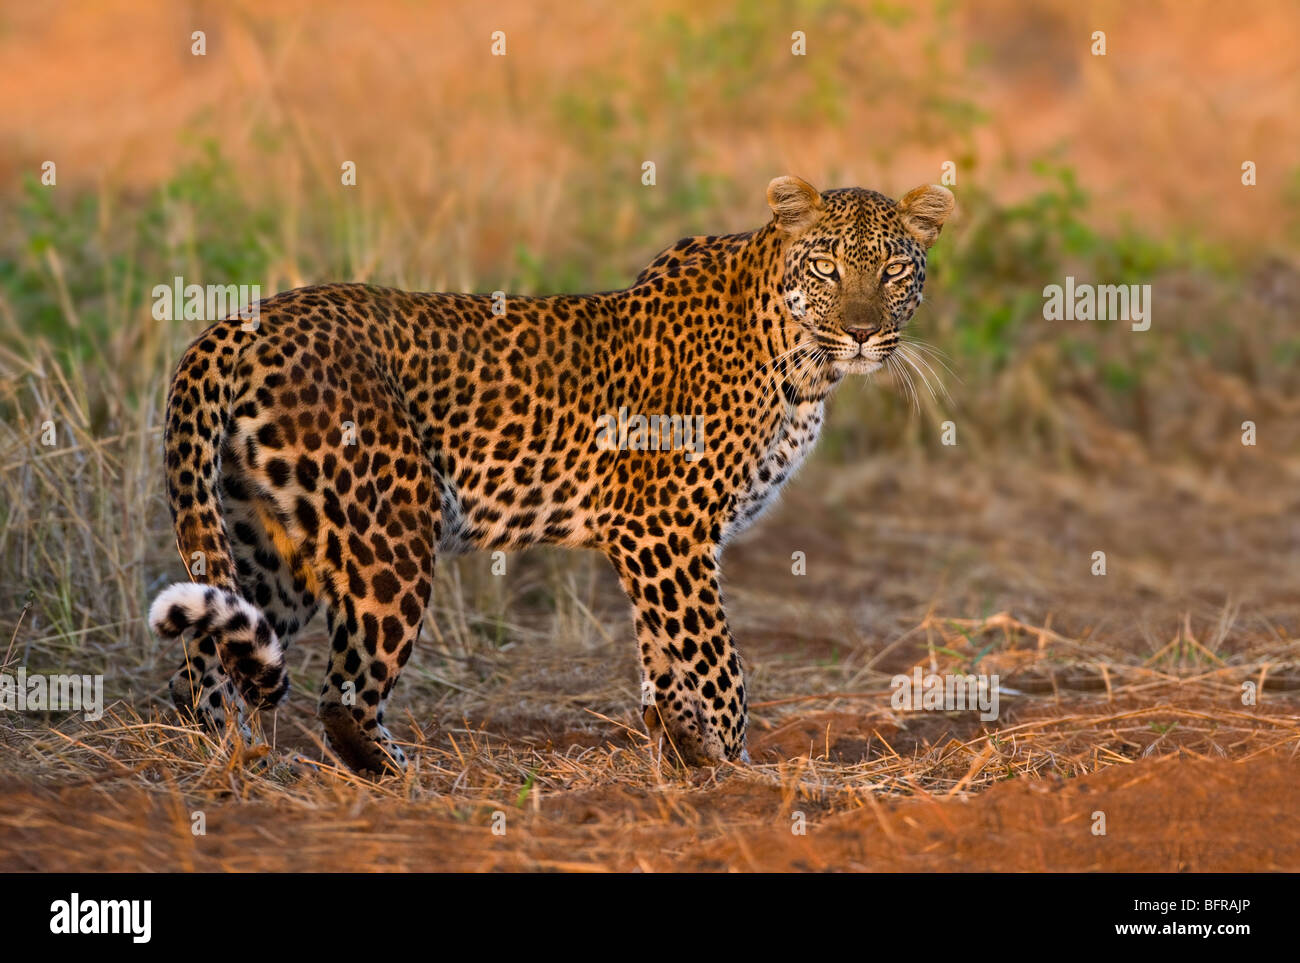 Leopard in warm afternoon light Stock Photo